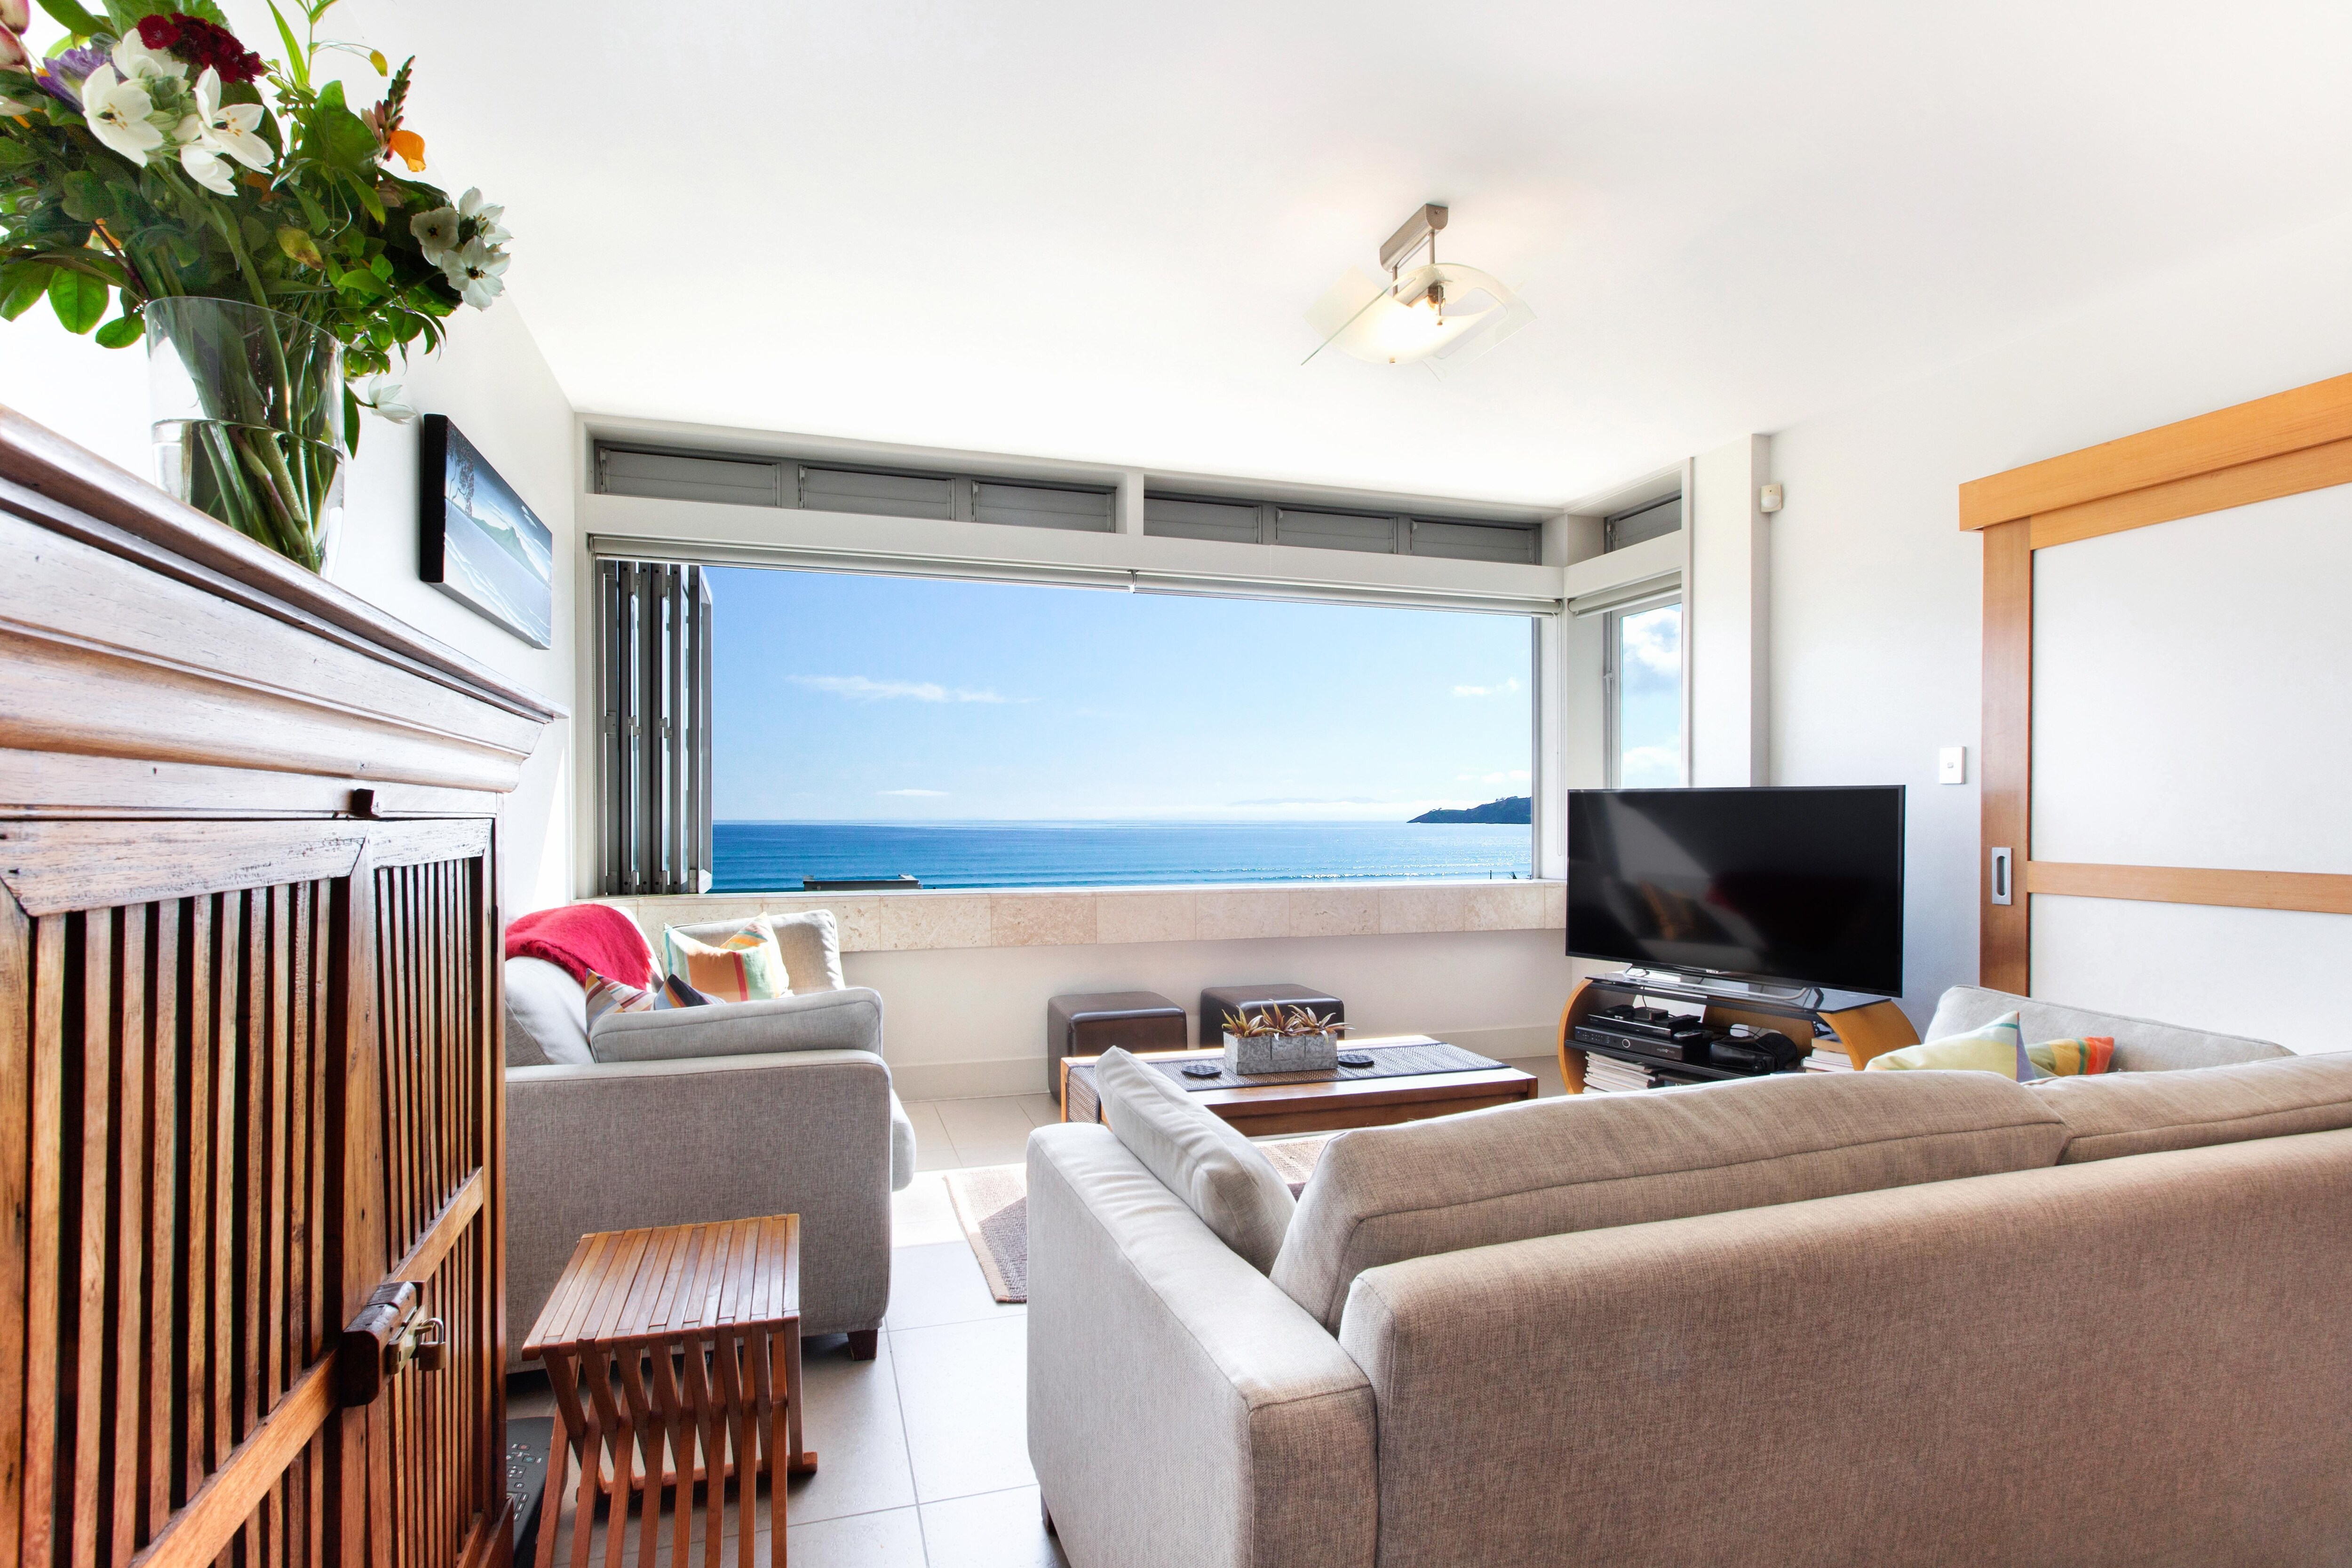 Property Image 1 - Apartment on the Beach - The Sands Unit 21